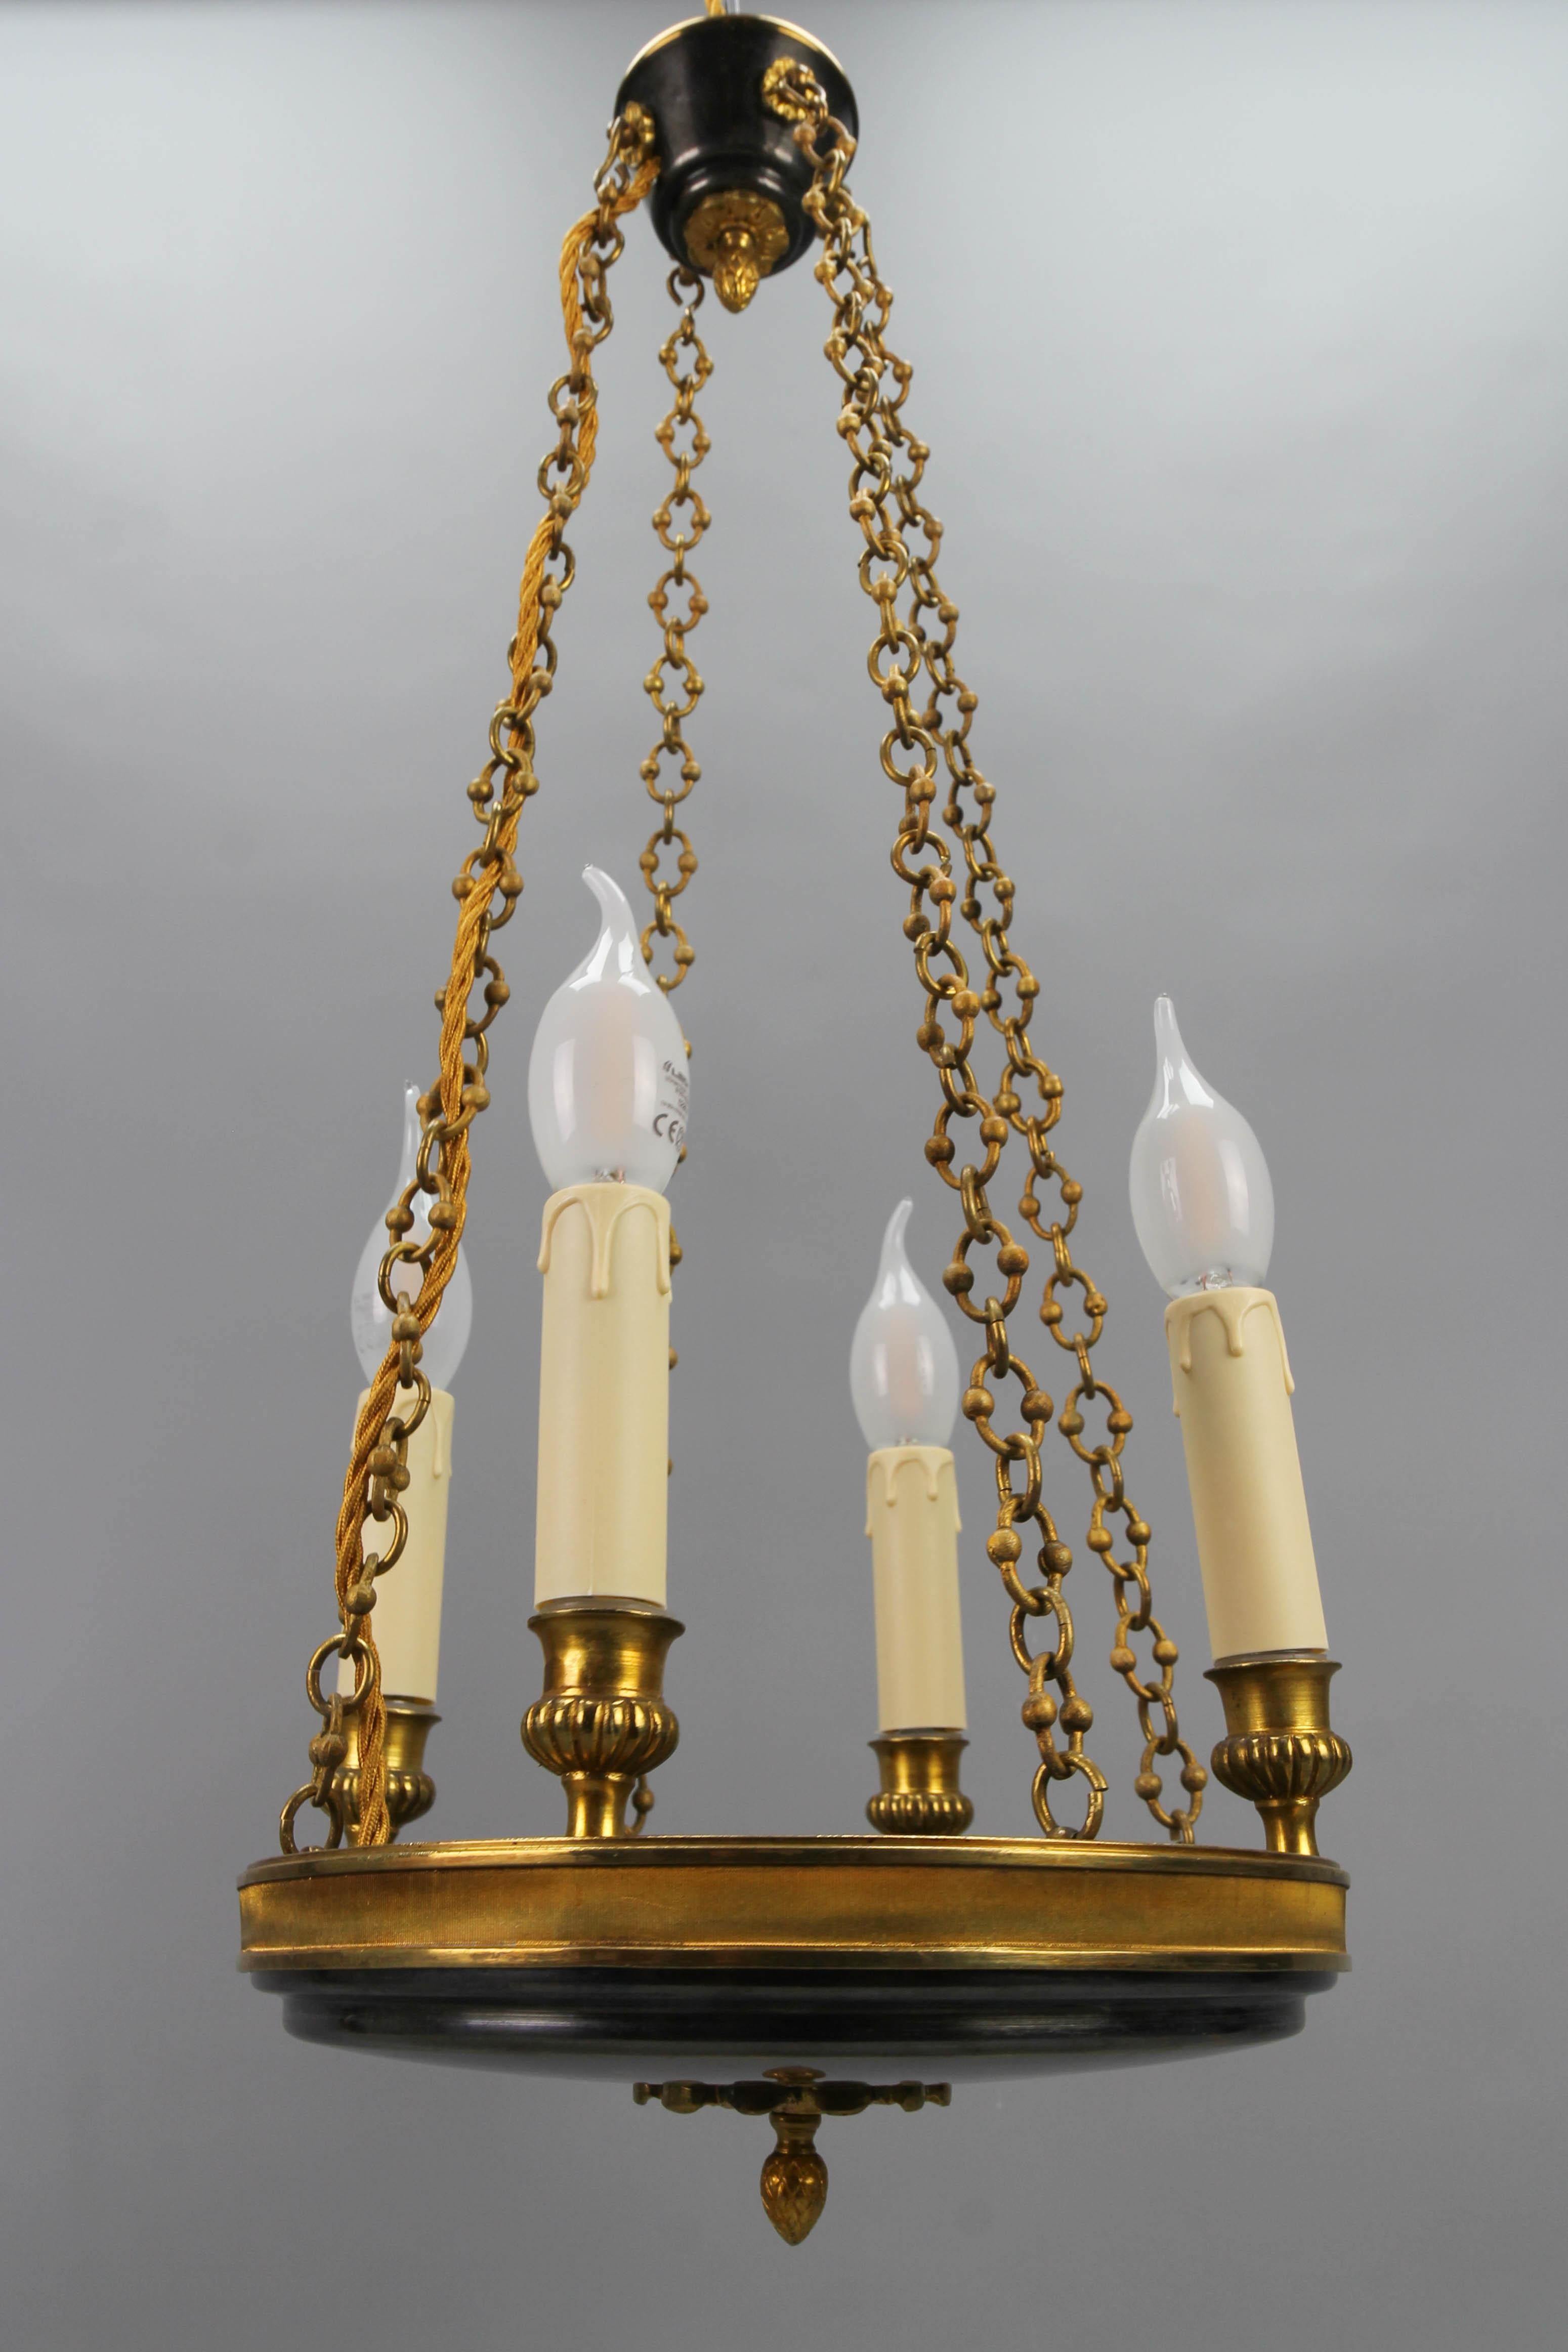 Early 20th Century French Empire Style Gilt Bronze Four-Light Chandelier.
An adorable and compact four-light pendant chandelier from the early 1900s. Hung on four ornate chains, gilt bronze details.
Four sockets for E14-size light bulbs.
Dimensions: